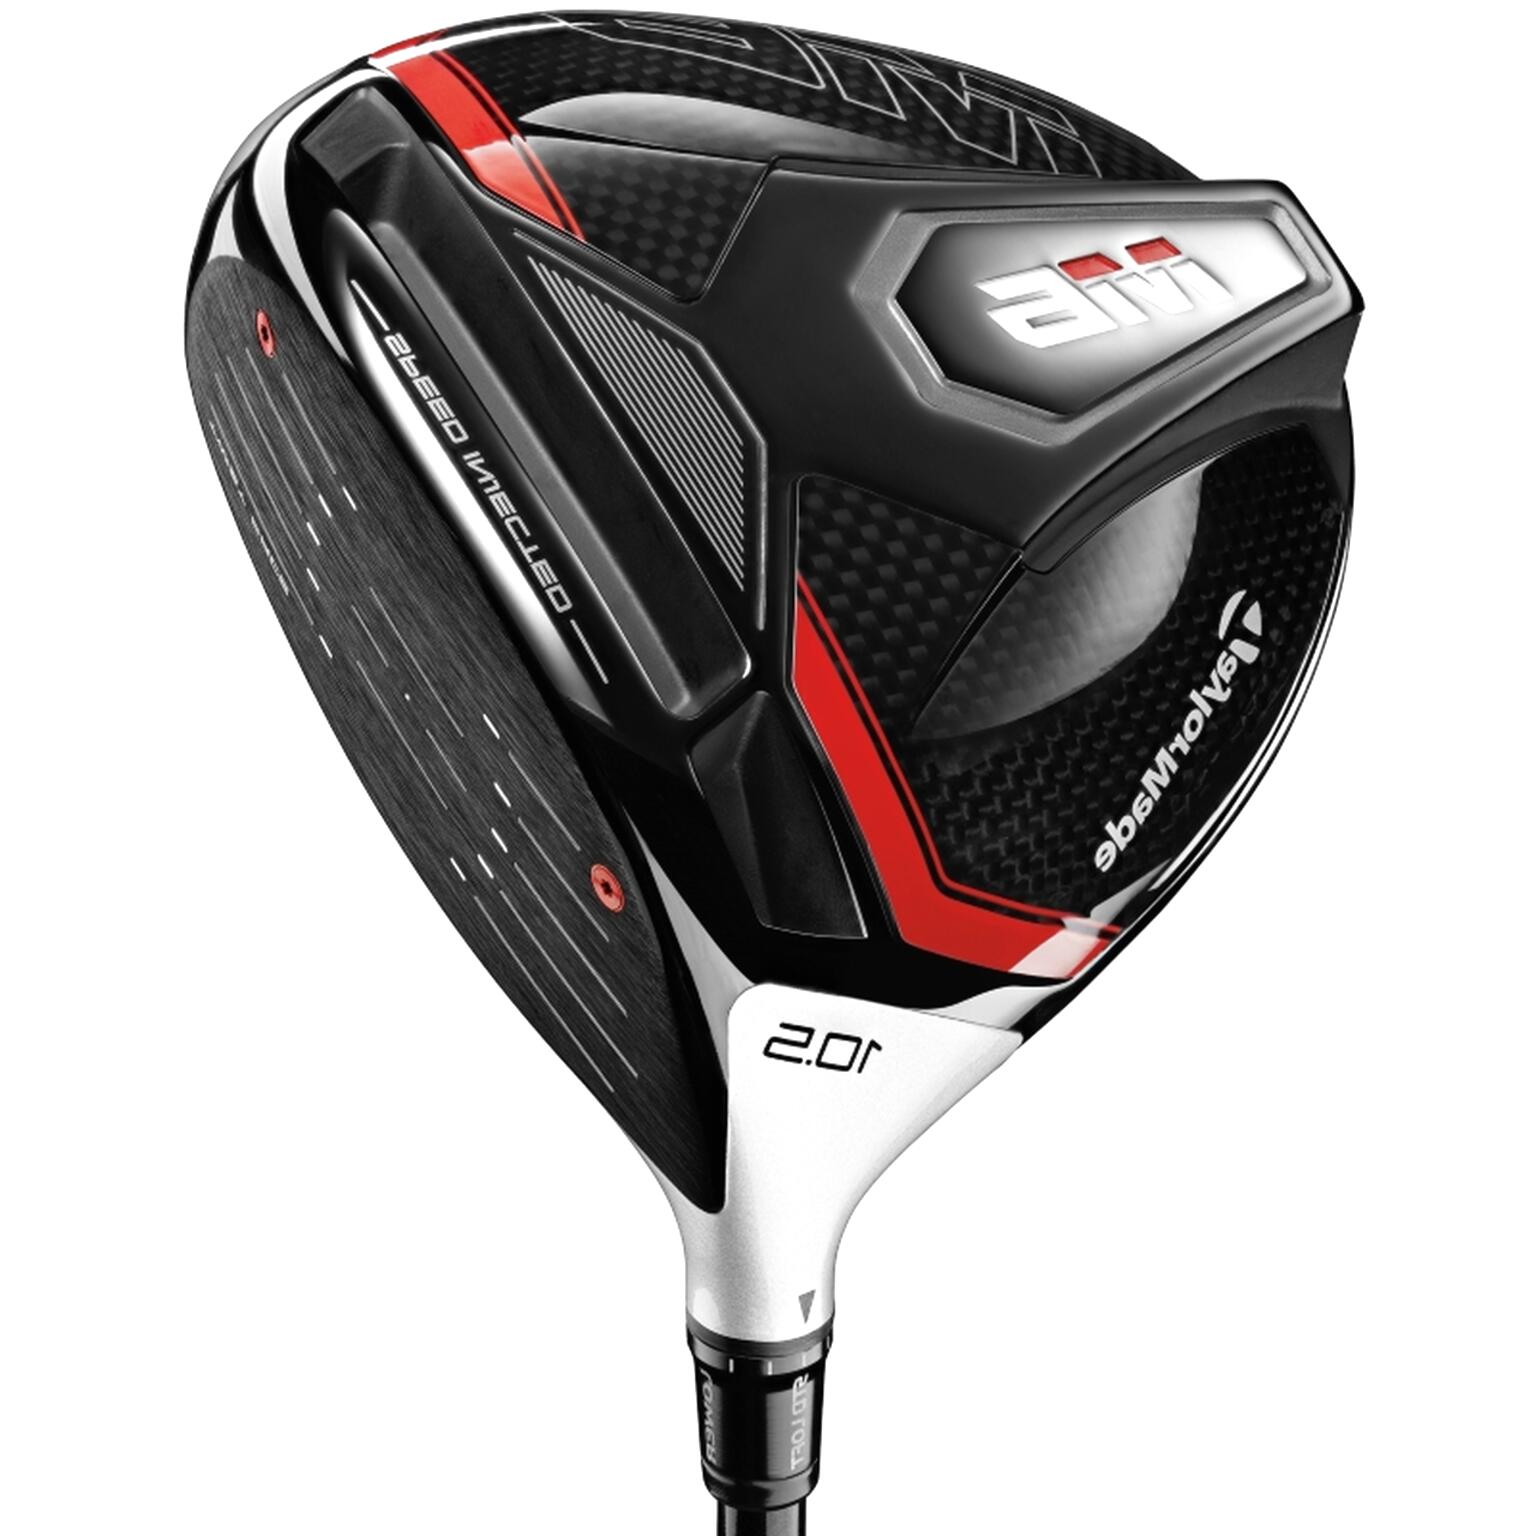 Taylormade Driver for sale in UK | 56 used Taylormade Drivers